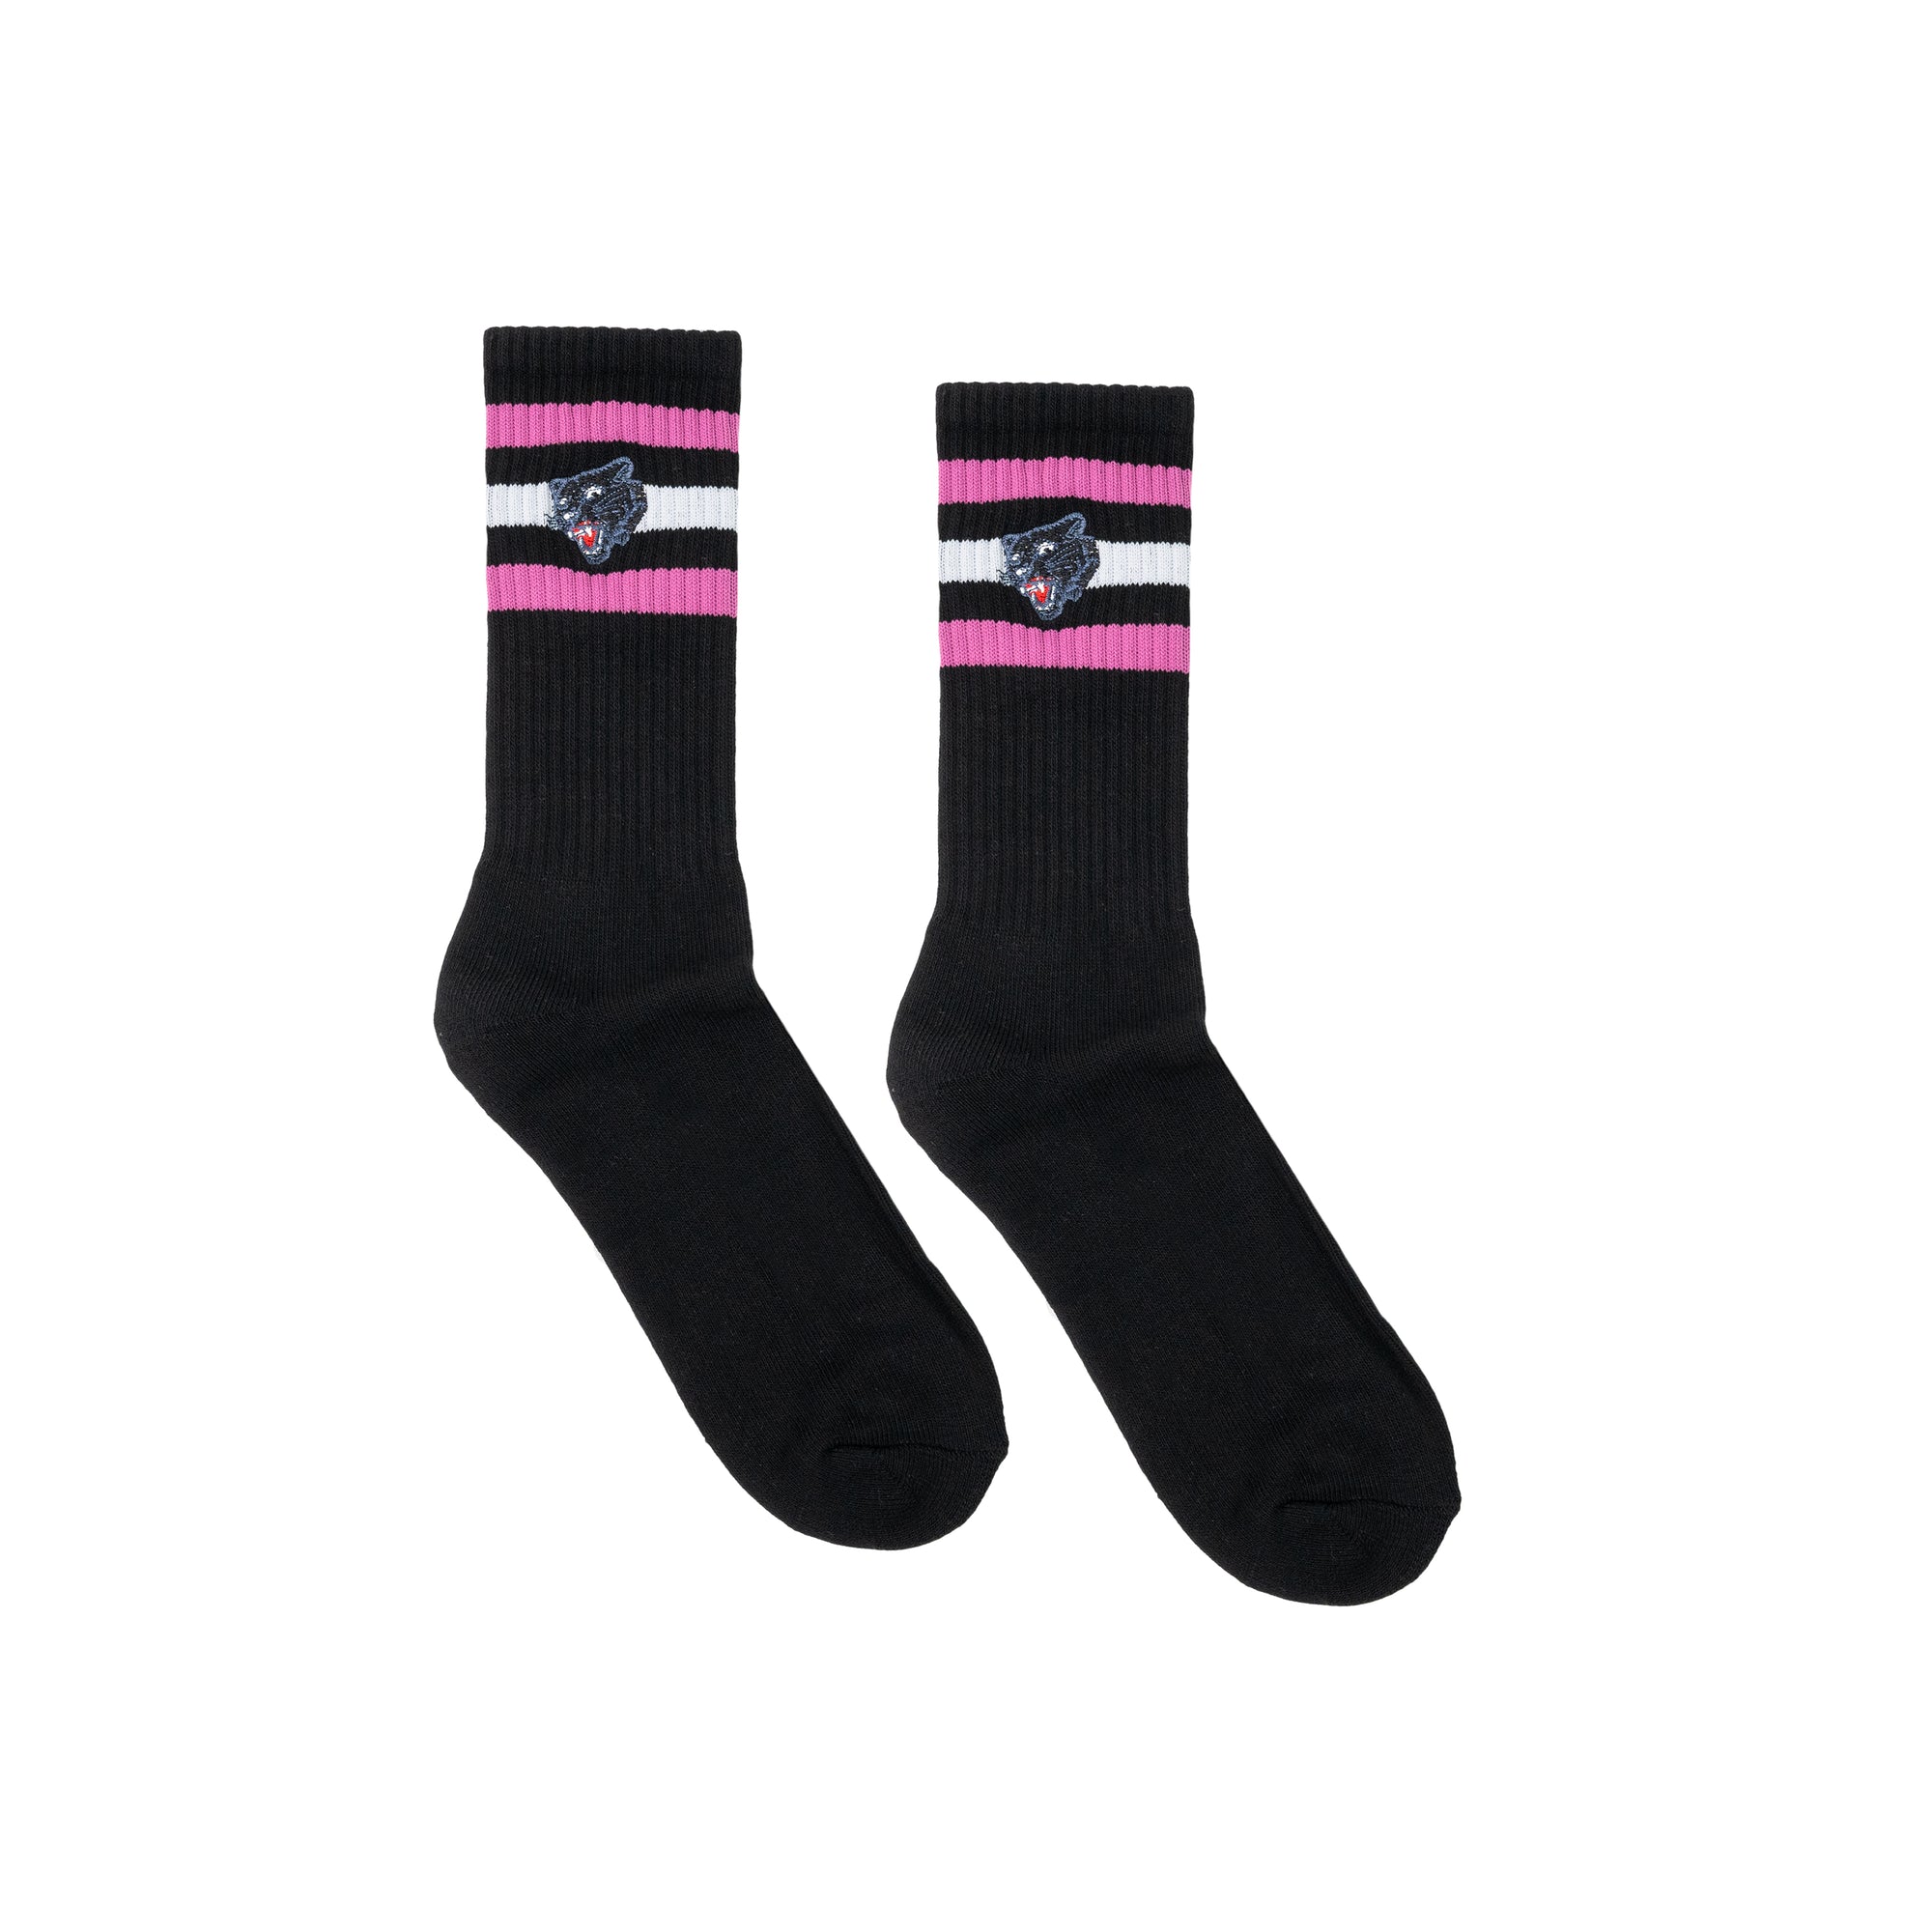 Embroidered panther socks black/white/pink